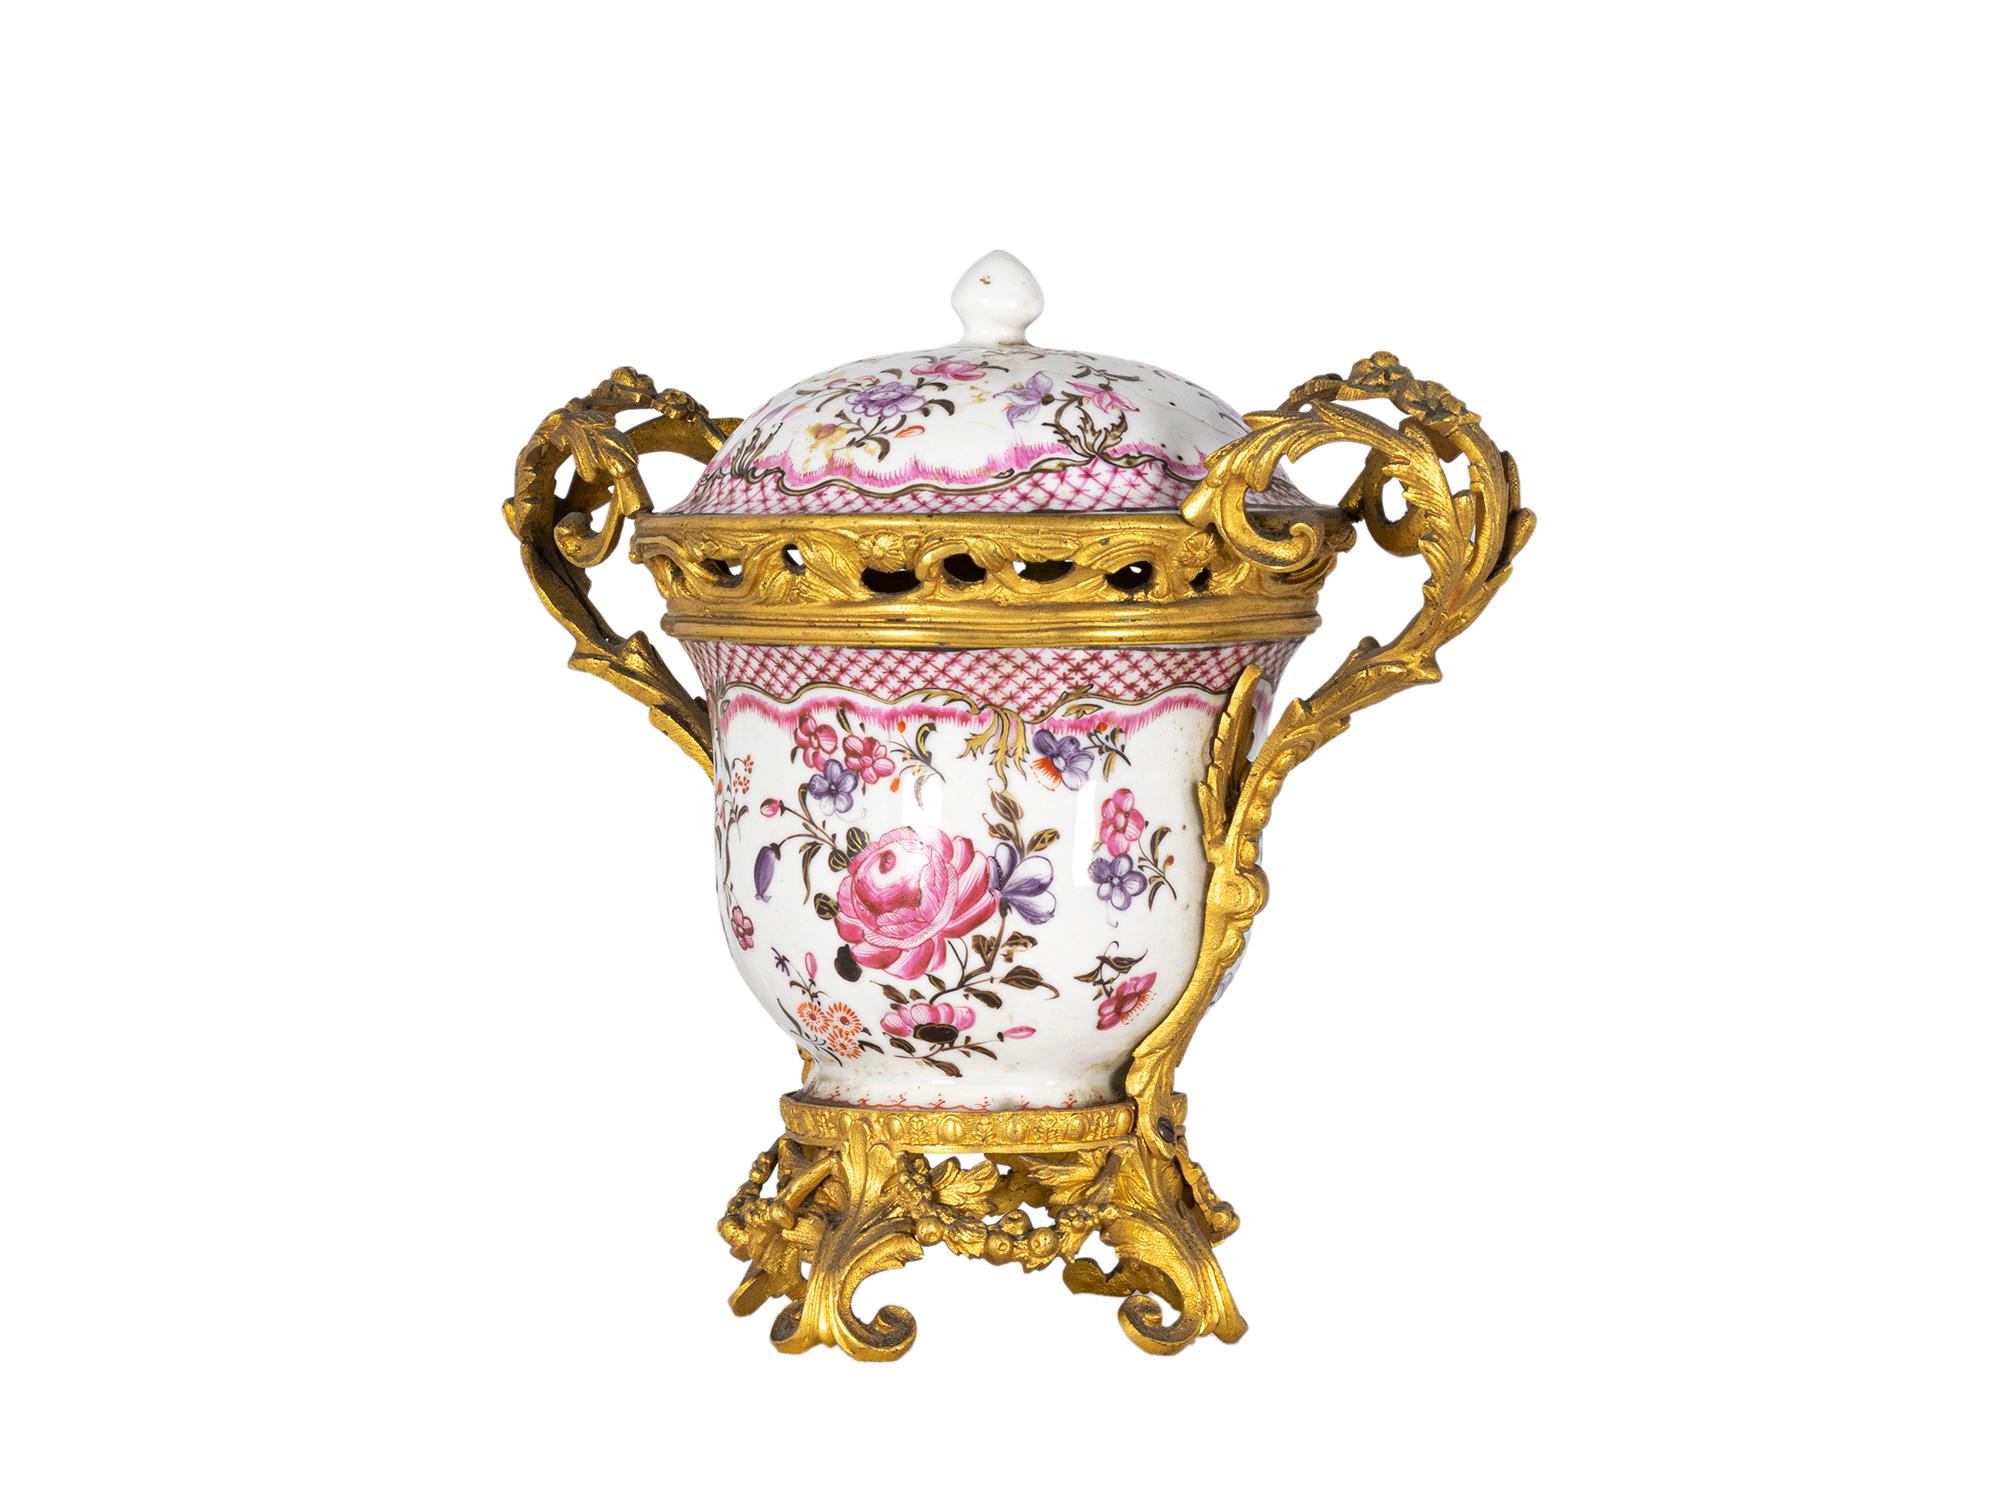 An unique, very special 18th century chinese famille rose India Company ormolu bronze mounted terrine porcelain.
Chinese porcelain from the Portuguese India Company during the Qianlong reign, from 1736 to 1795.
The piece is raised by two beautiful